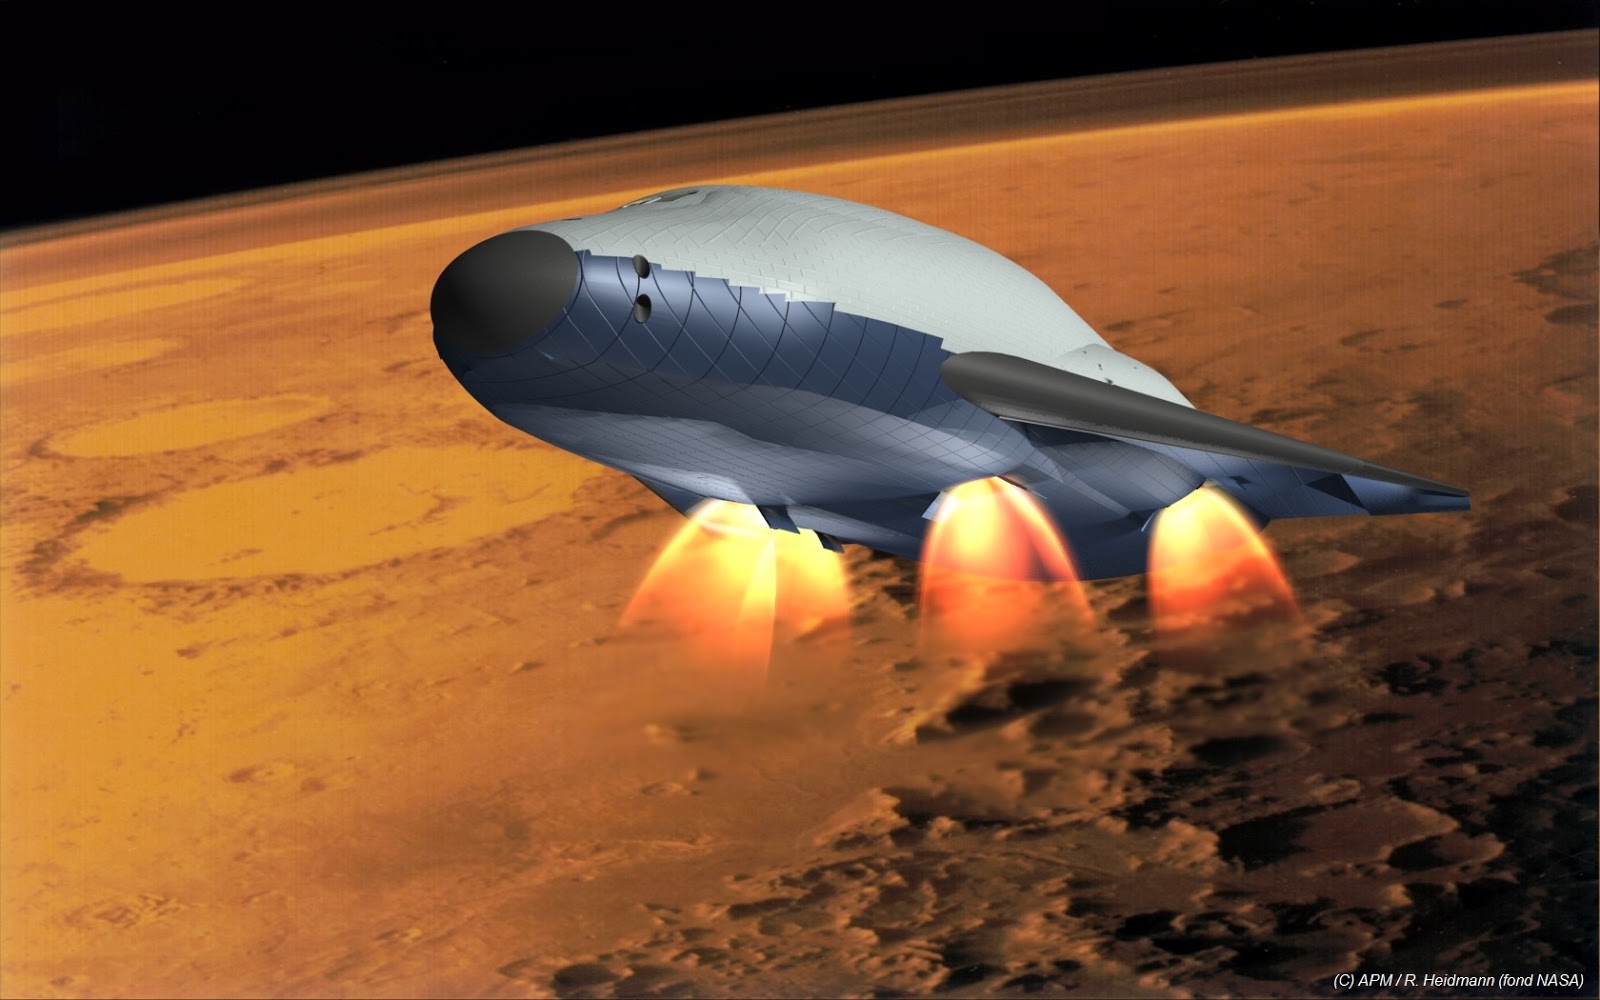 spacex-mars-colonial-transporter-concept-by-richard-heidmann-2